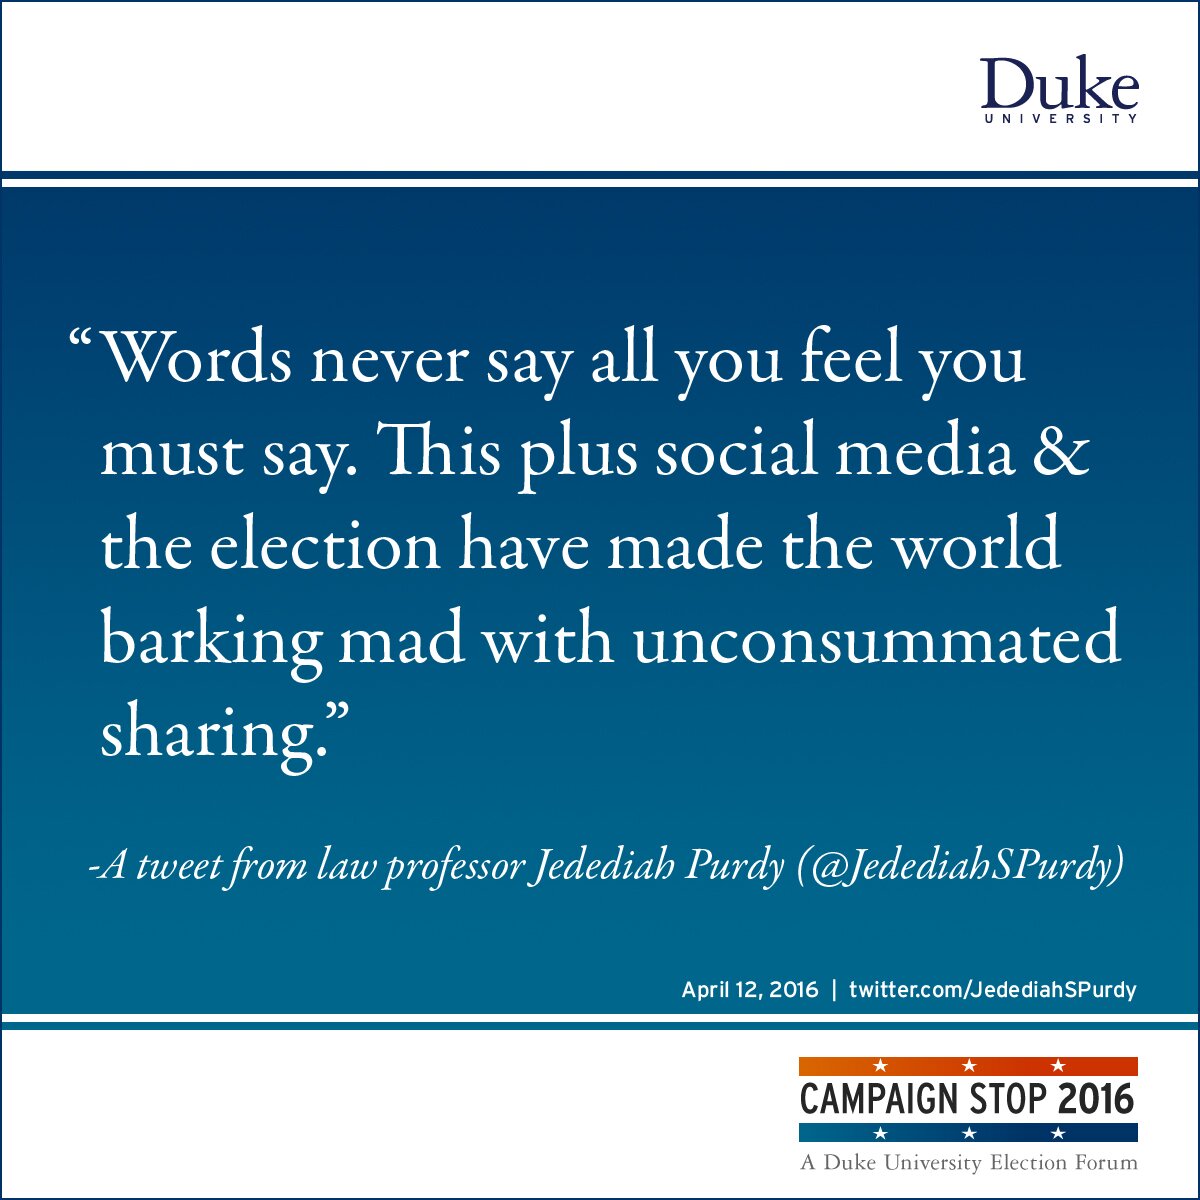 “Words never say all you feel you must say. This plus social media & the election have made the world barking mad with unconsummated sharing.” -A tweet from law professor Jedediah Purdy (@JedediahSPurdy)